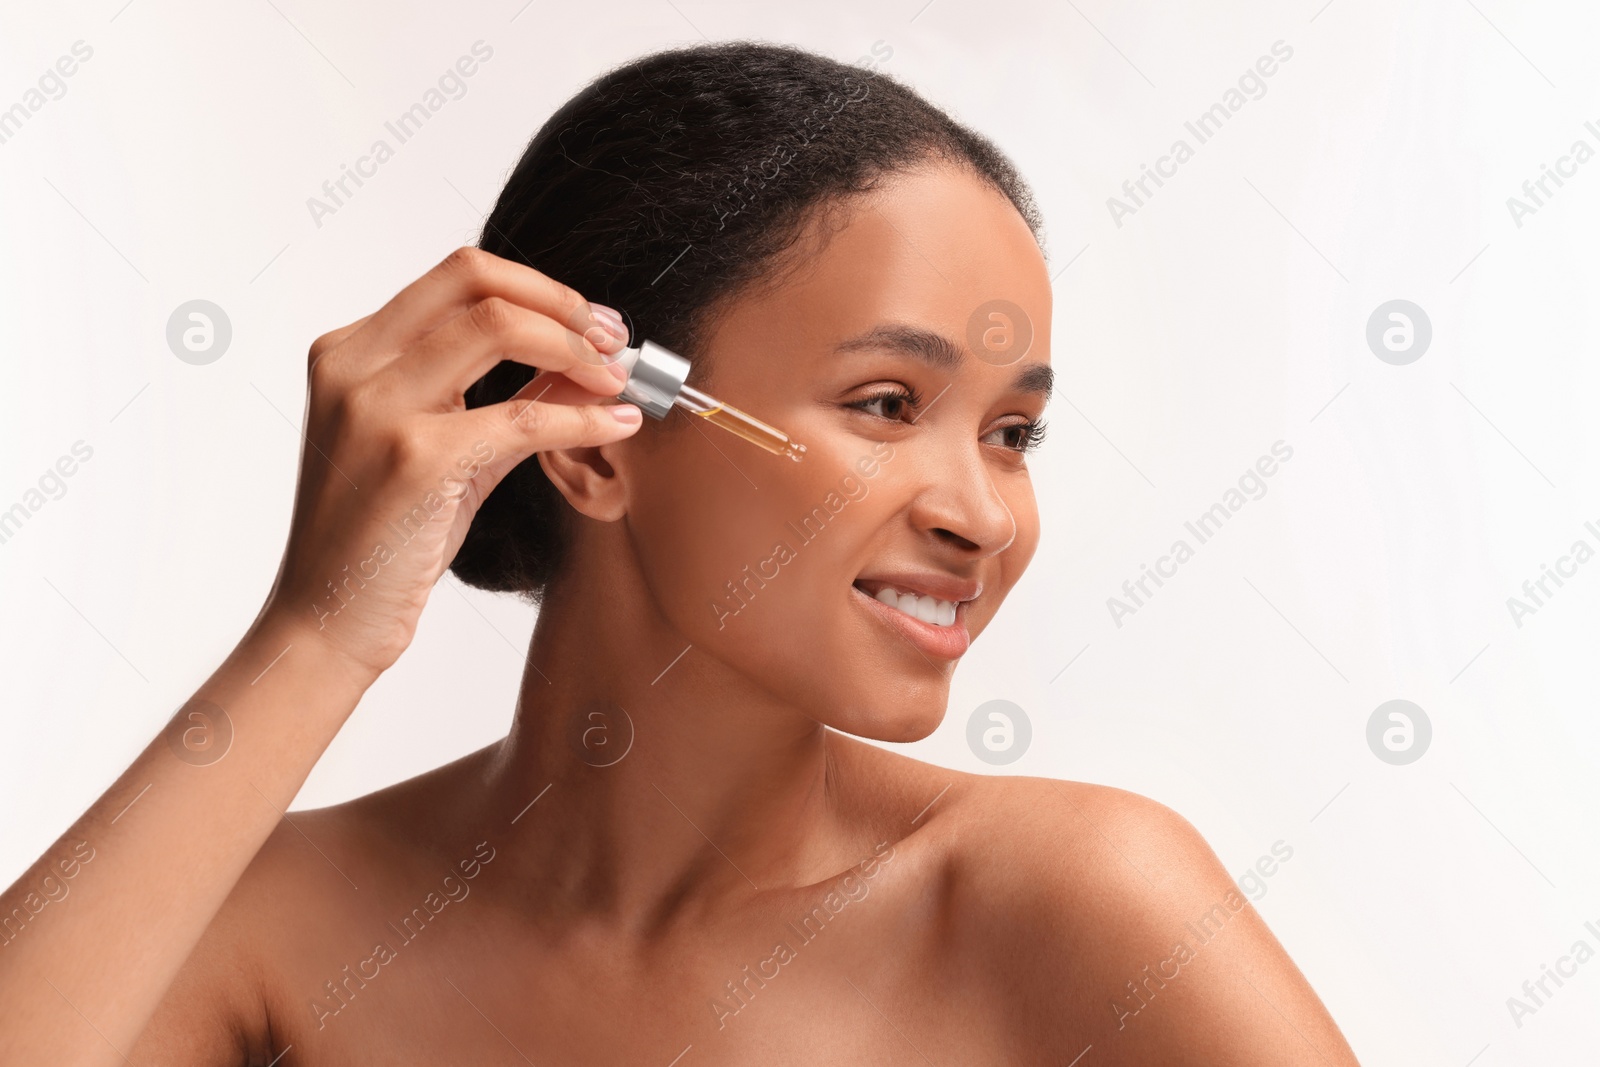 Photo of Smiling woman applying serum onto her face on white background